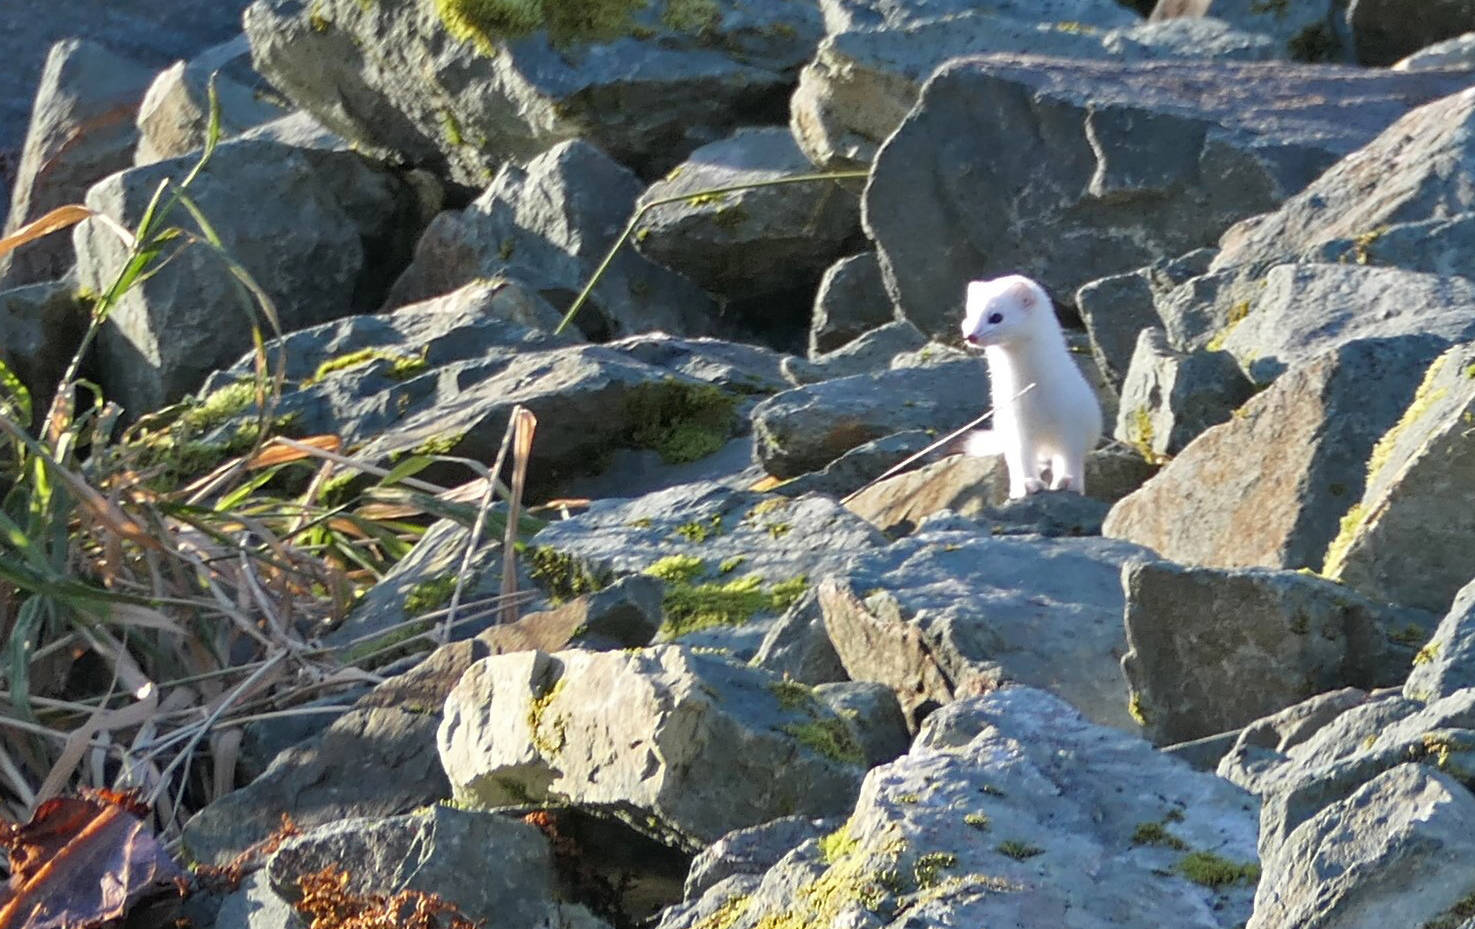 An ermine emerges to look around while exploring the crevices among the roadside rocks. While its white winter coat is conspicuous now, it will help it blend in with its surroundings during winter. (Courtesy Photo /David Bergeson)